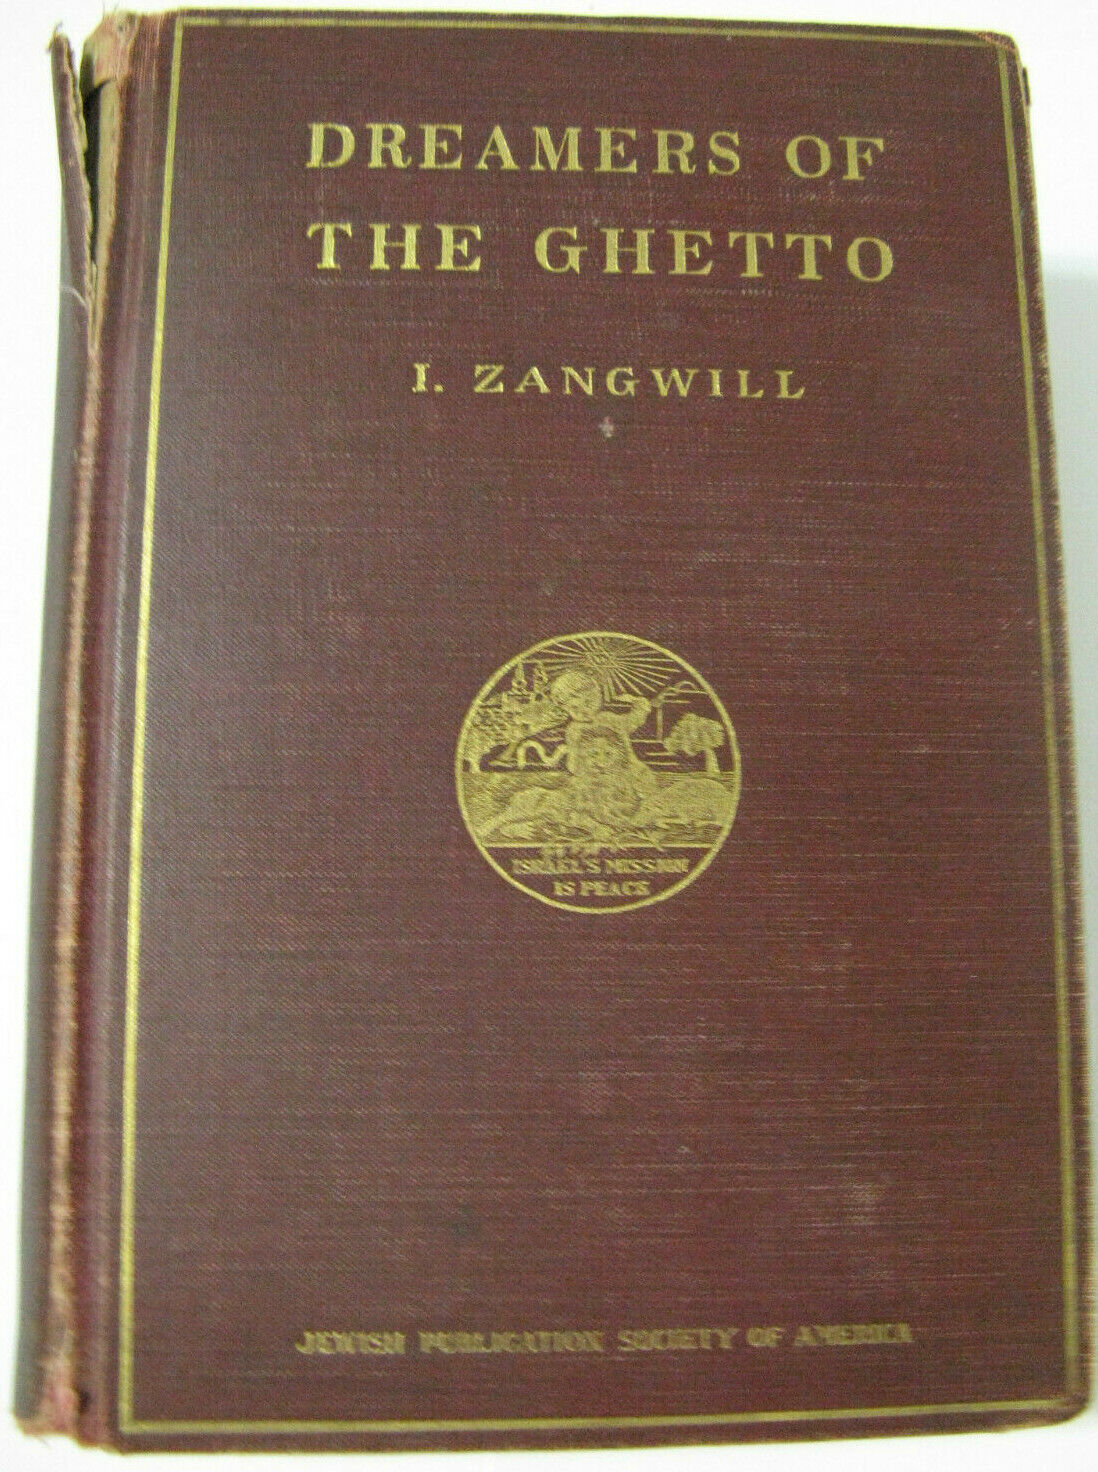 1898 Dreamers Of The Ghetto By Israel Zangwill Philadelphia Jewish Publ. Society